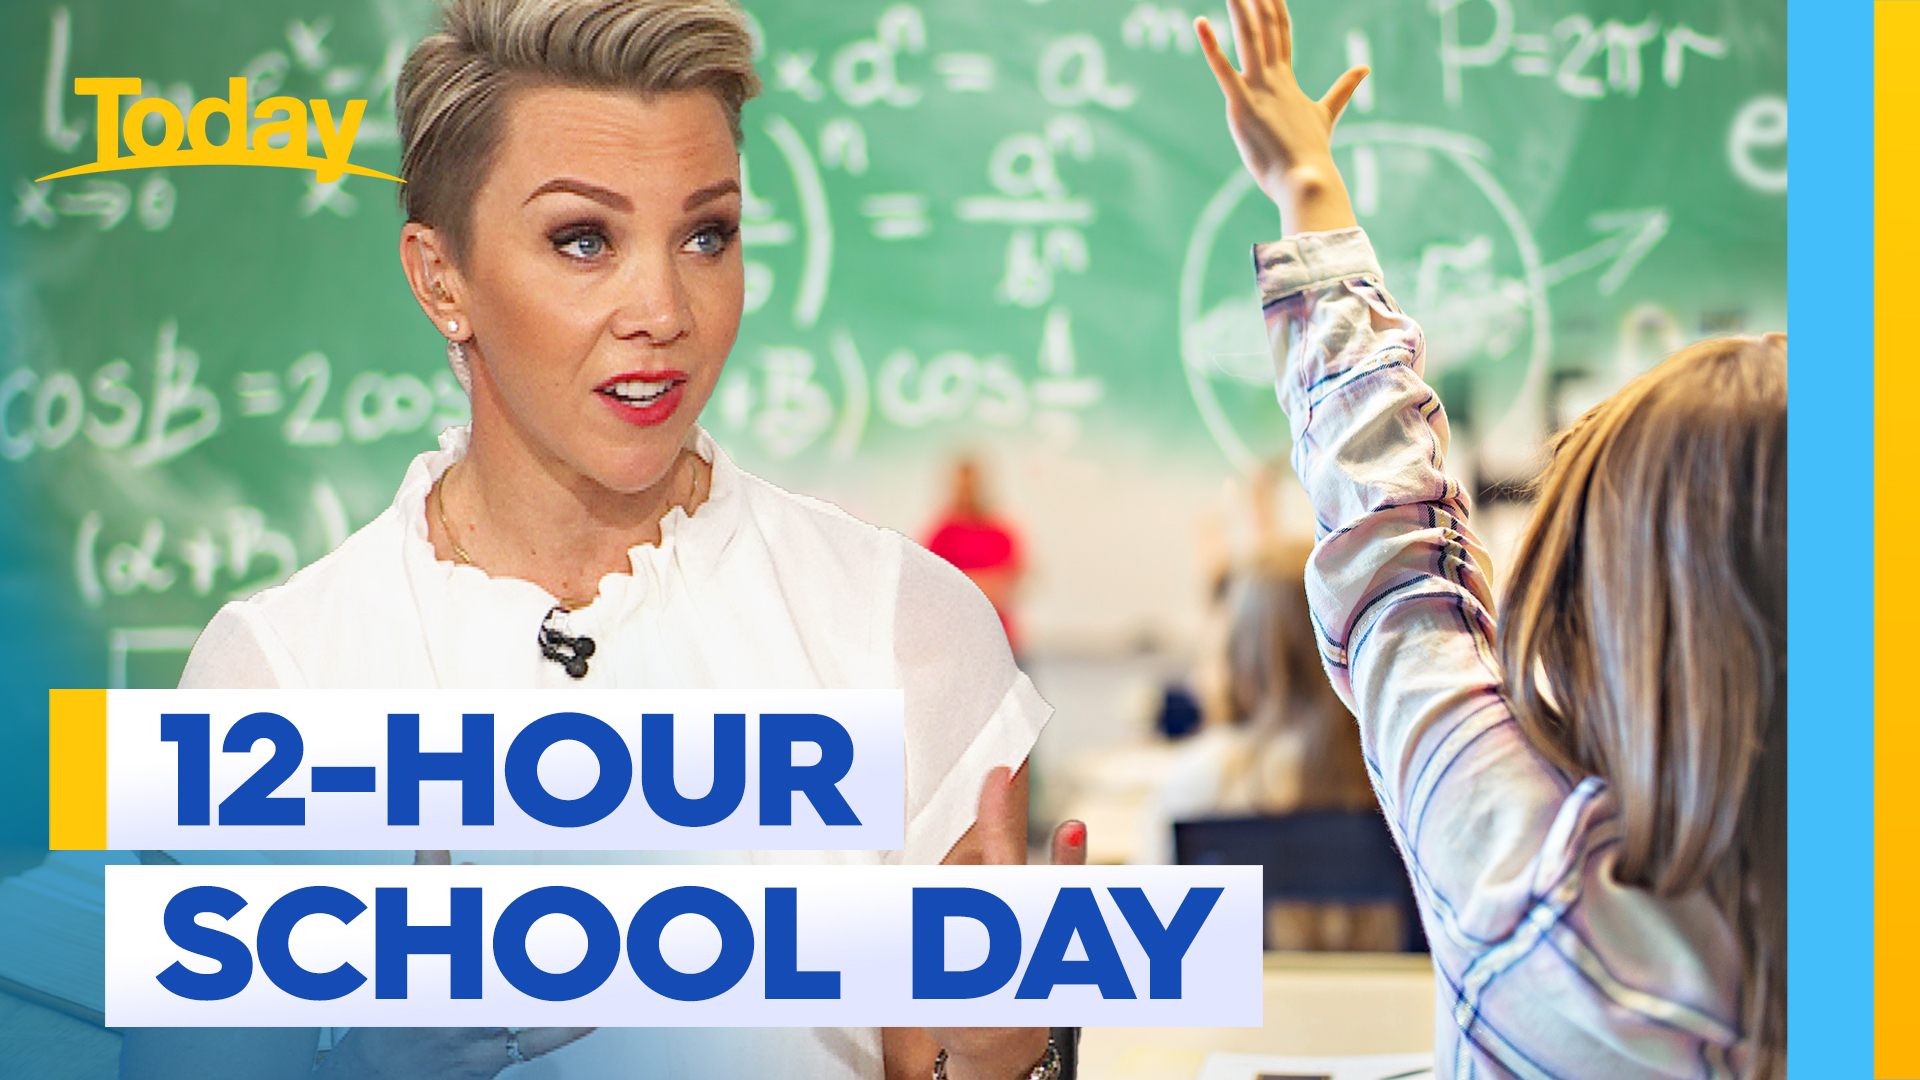 Could a 12 hour school day really work?